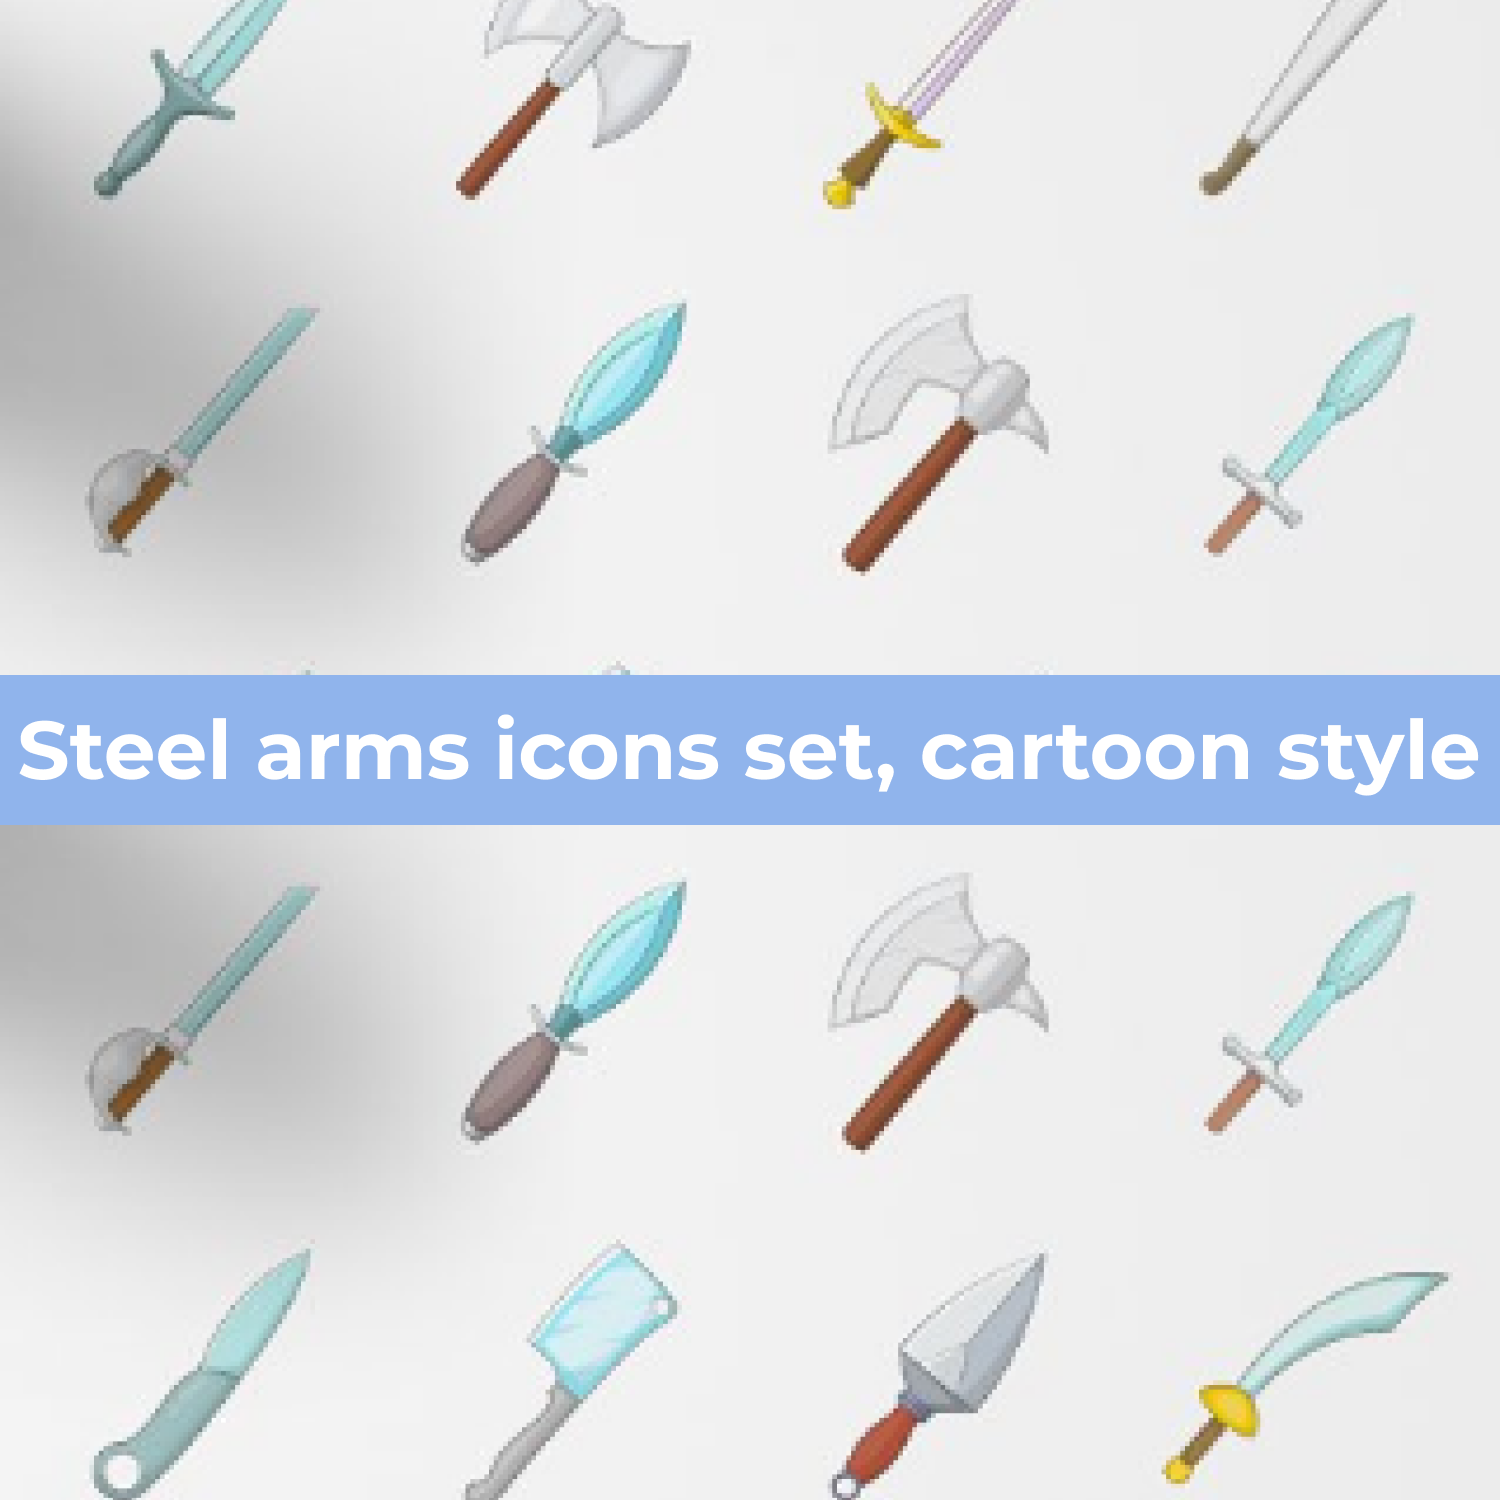 Steel arms icons set, cartoon style cover image.